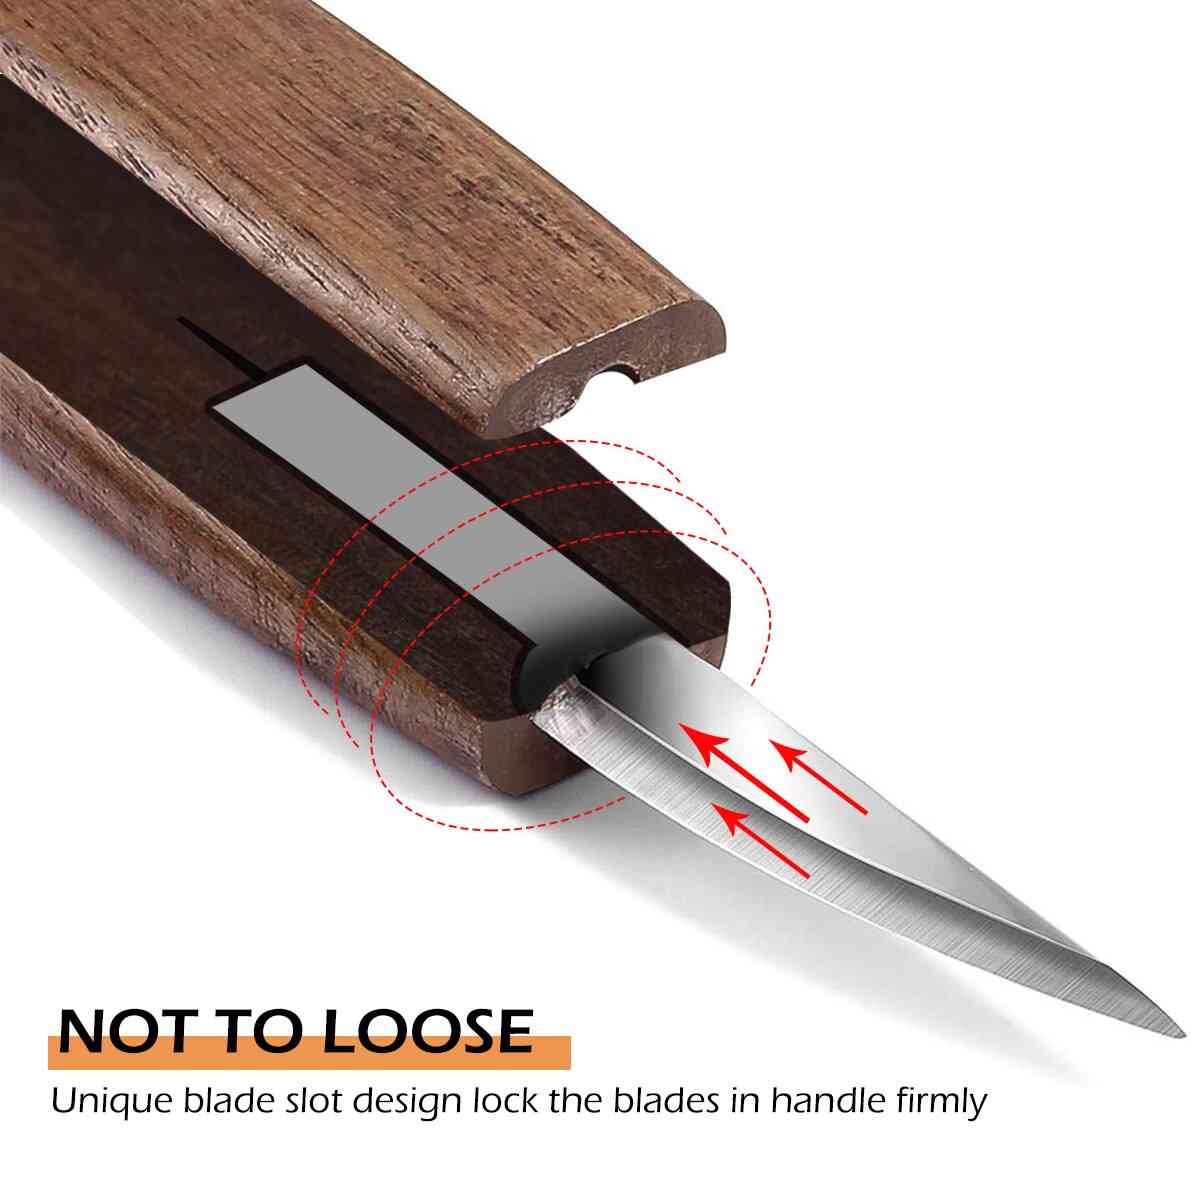 Wood Carving Knife, Cutter Woodworking Hand Tool Set